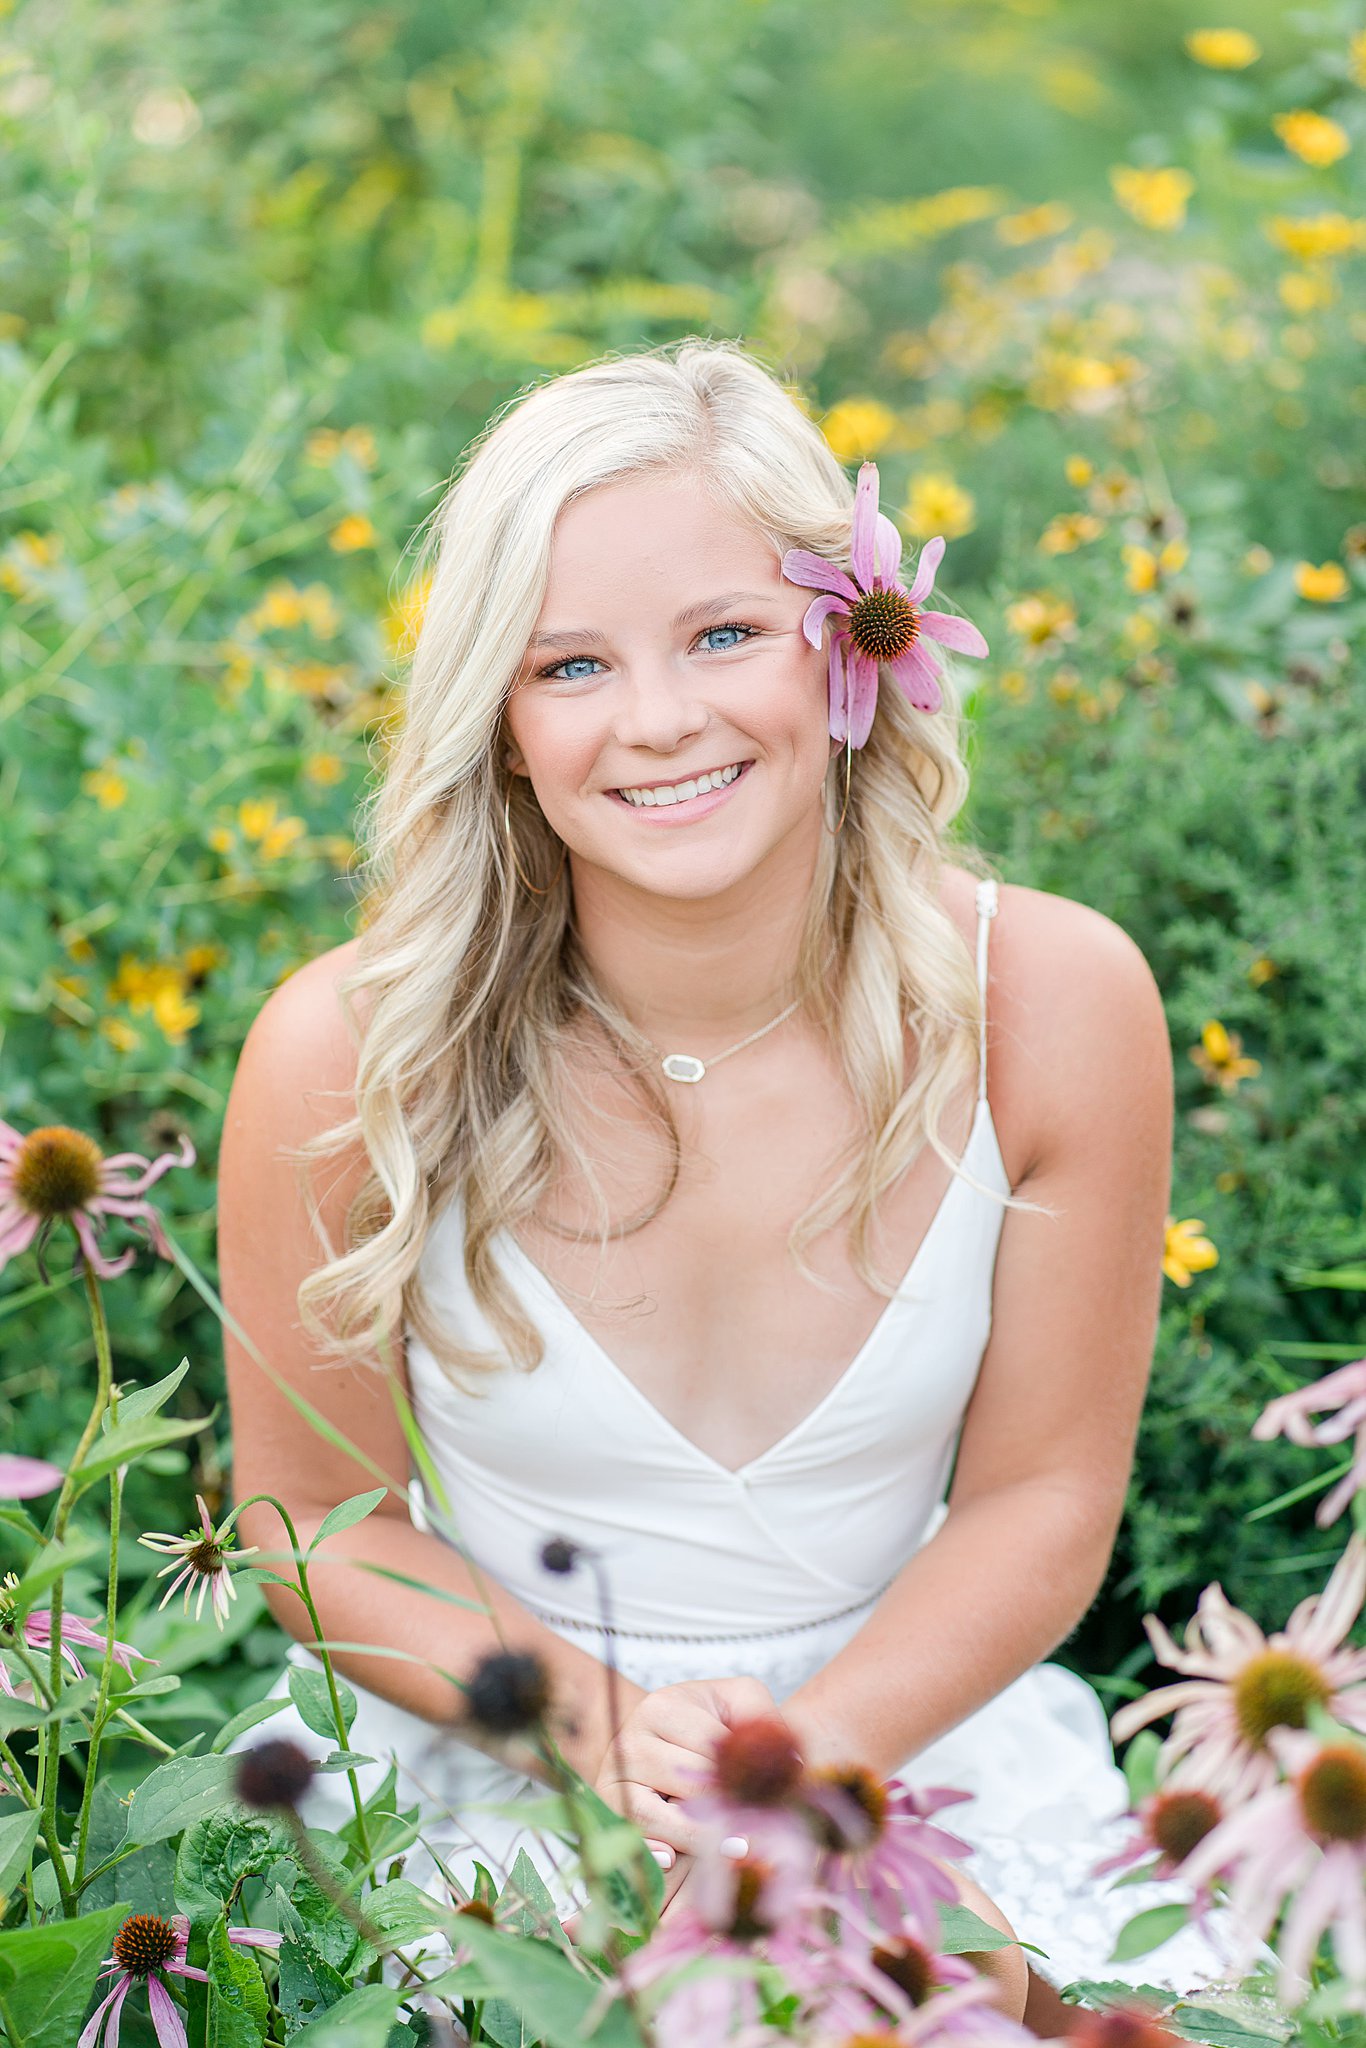 High school senior sits in a field of colorful wildflowers in a white dress Century senior high school